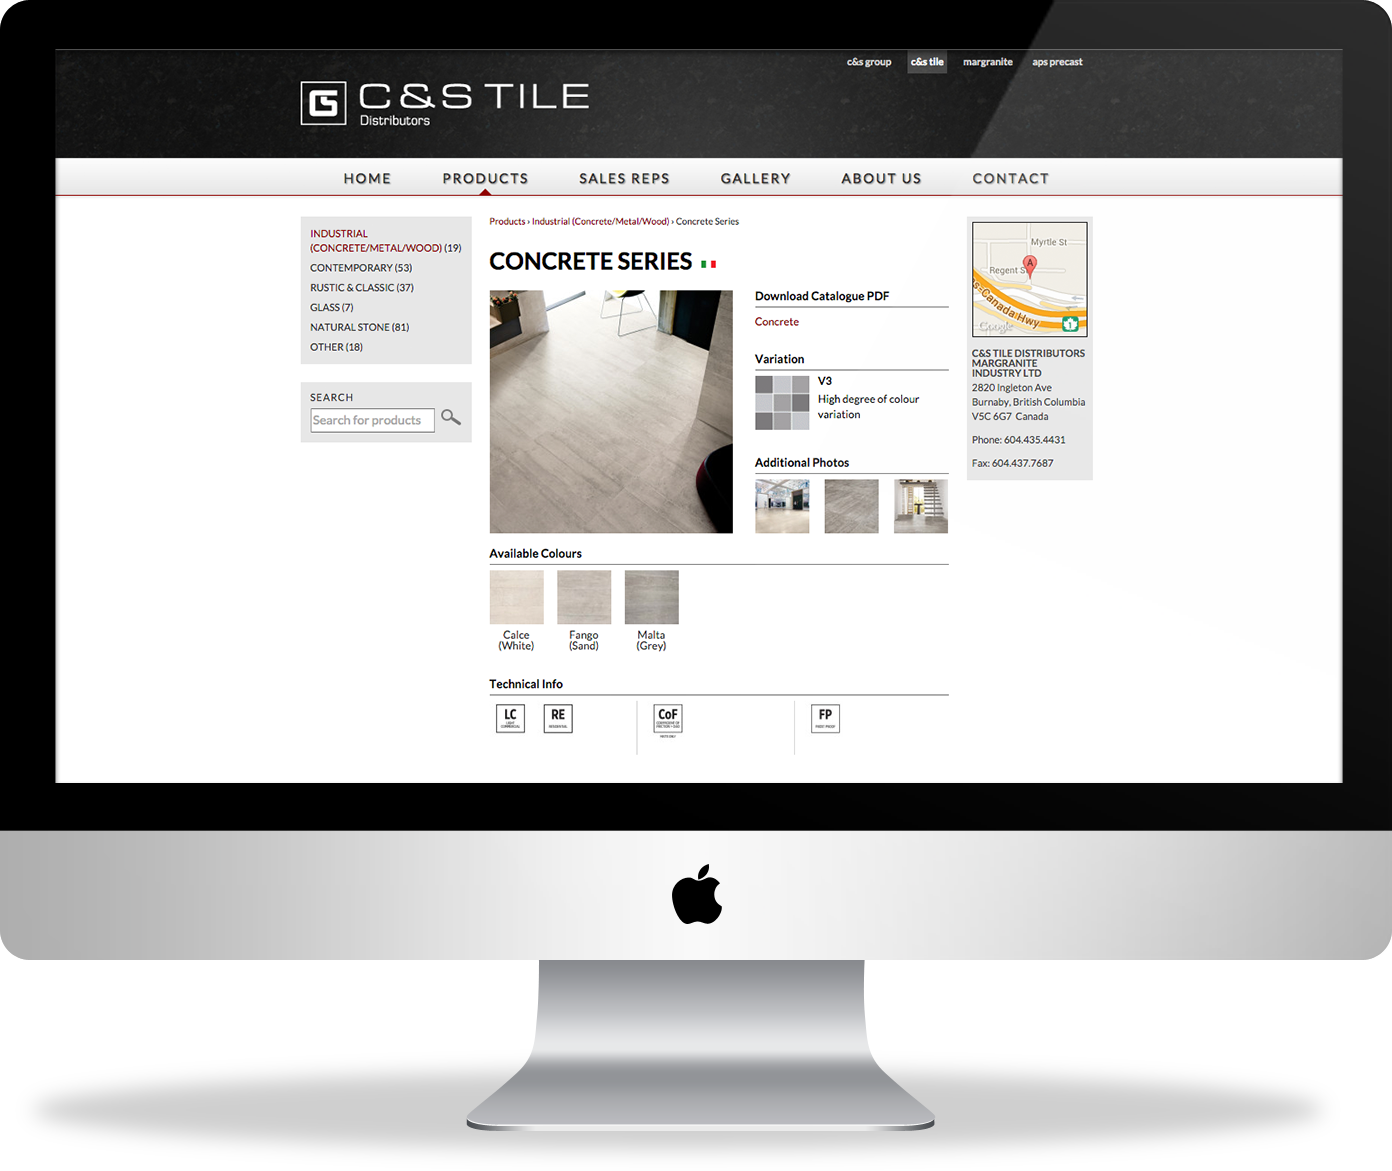 C&S Tile website - product page